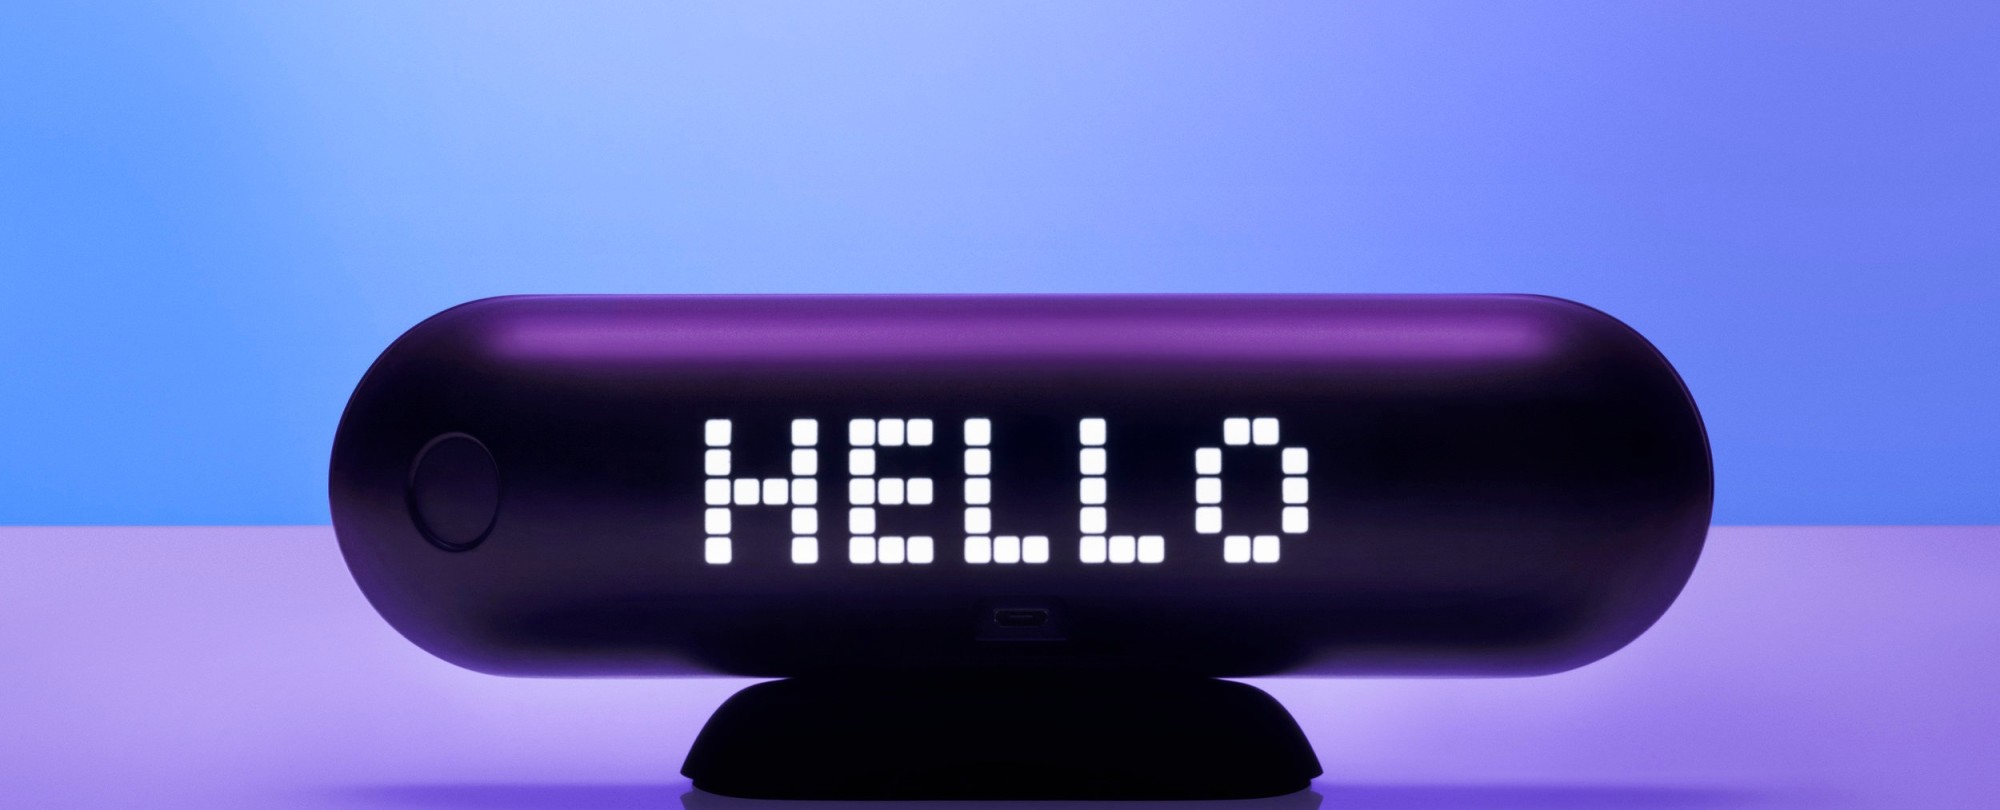 An image of a Lyft amp with the word "Hello"